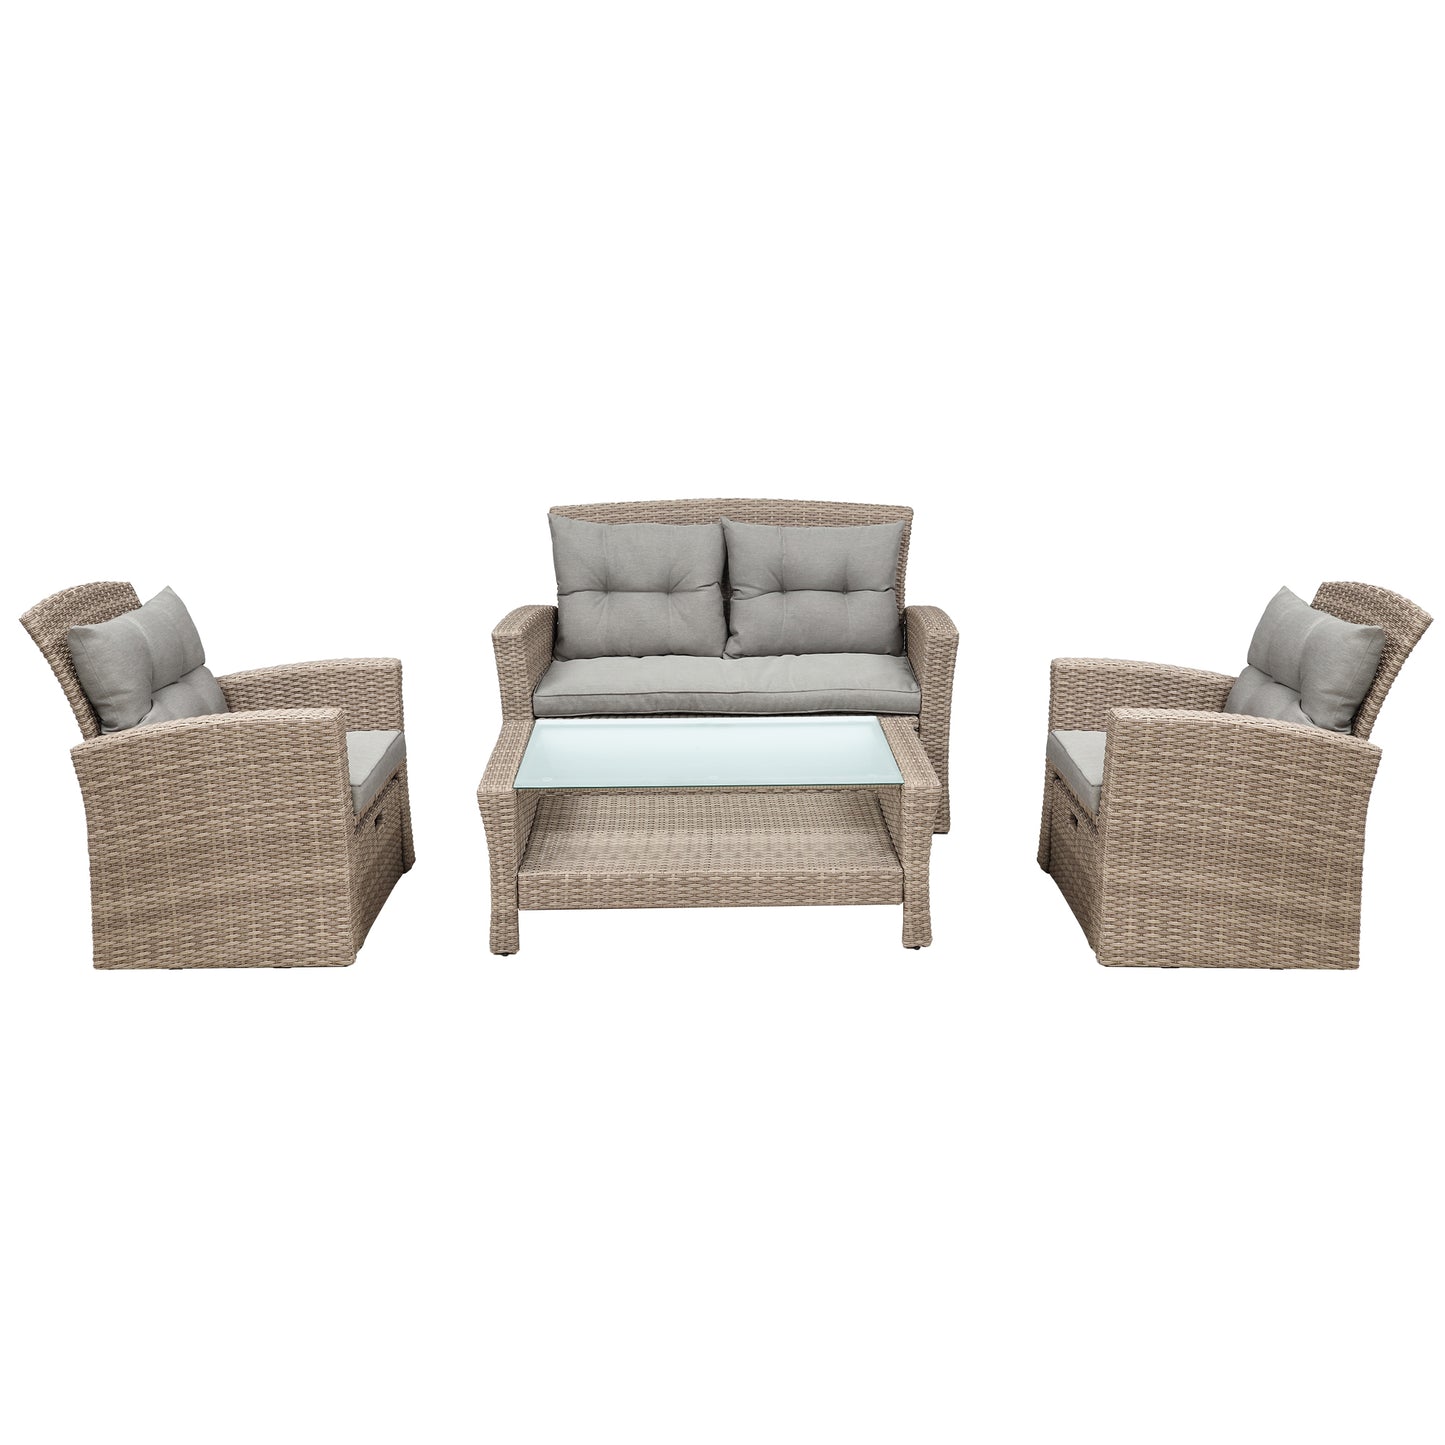 SYNGAR 4 Pieces Outdoor Patio Conversation Set, PE Rattan Wicker Furniture Set, Outdoor Patio Set Bistro Set with Loveseat Sofa, Single Chairs, Ottoman, Coffee Table for Backyard, Poolside, Gray